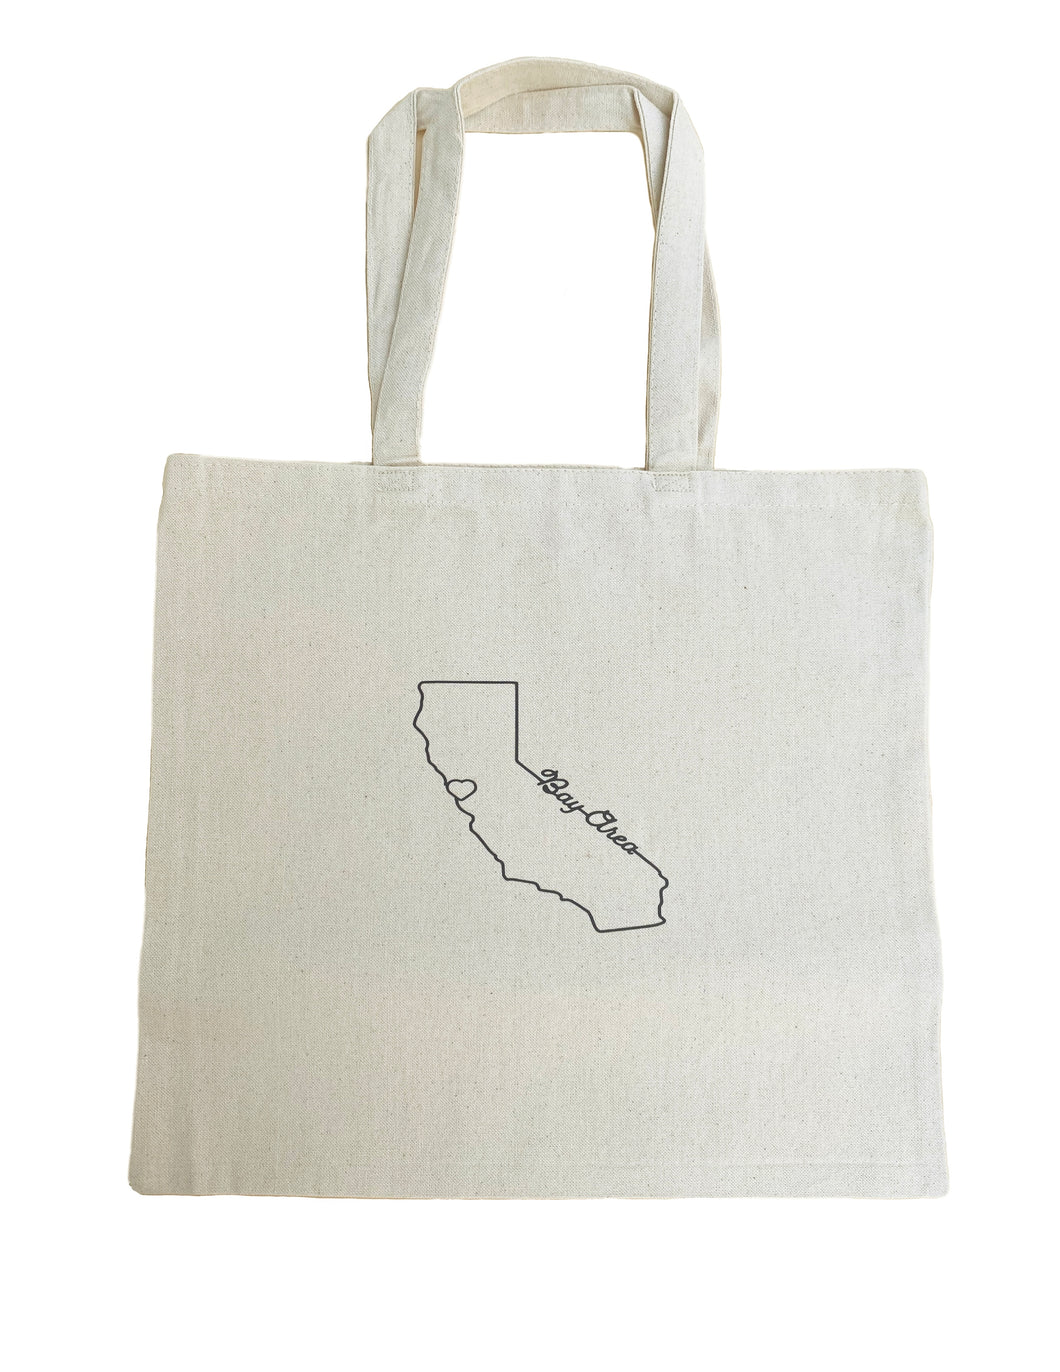 Bay Area love!  This tote bag is lightweight and easy to pack on the go.   Dimensions: Width: 14.25 inches, Length: 16.25 inches, Handle drop: 11 inches    Material: 100% cotton 